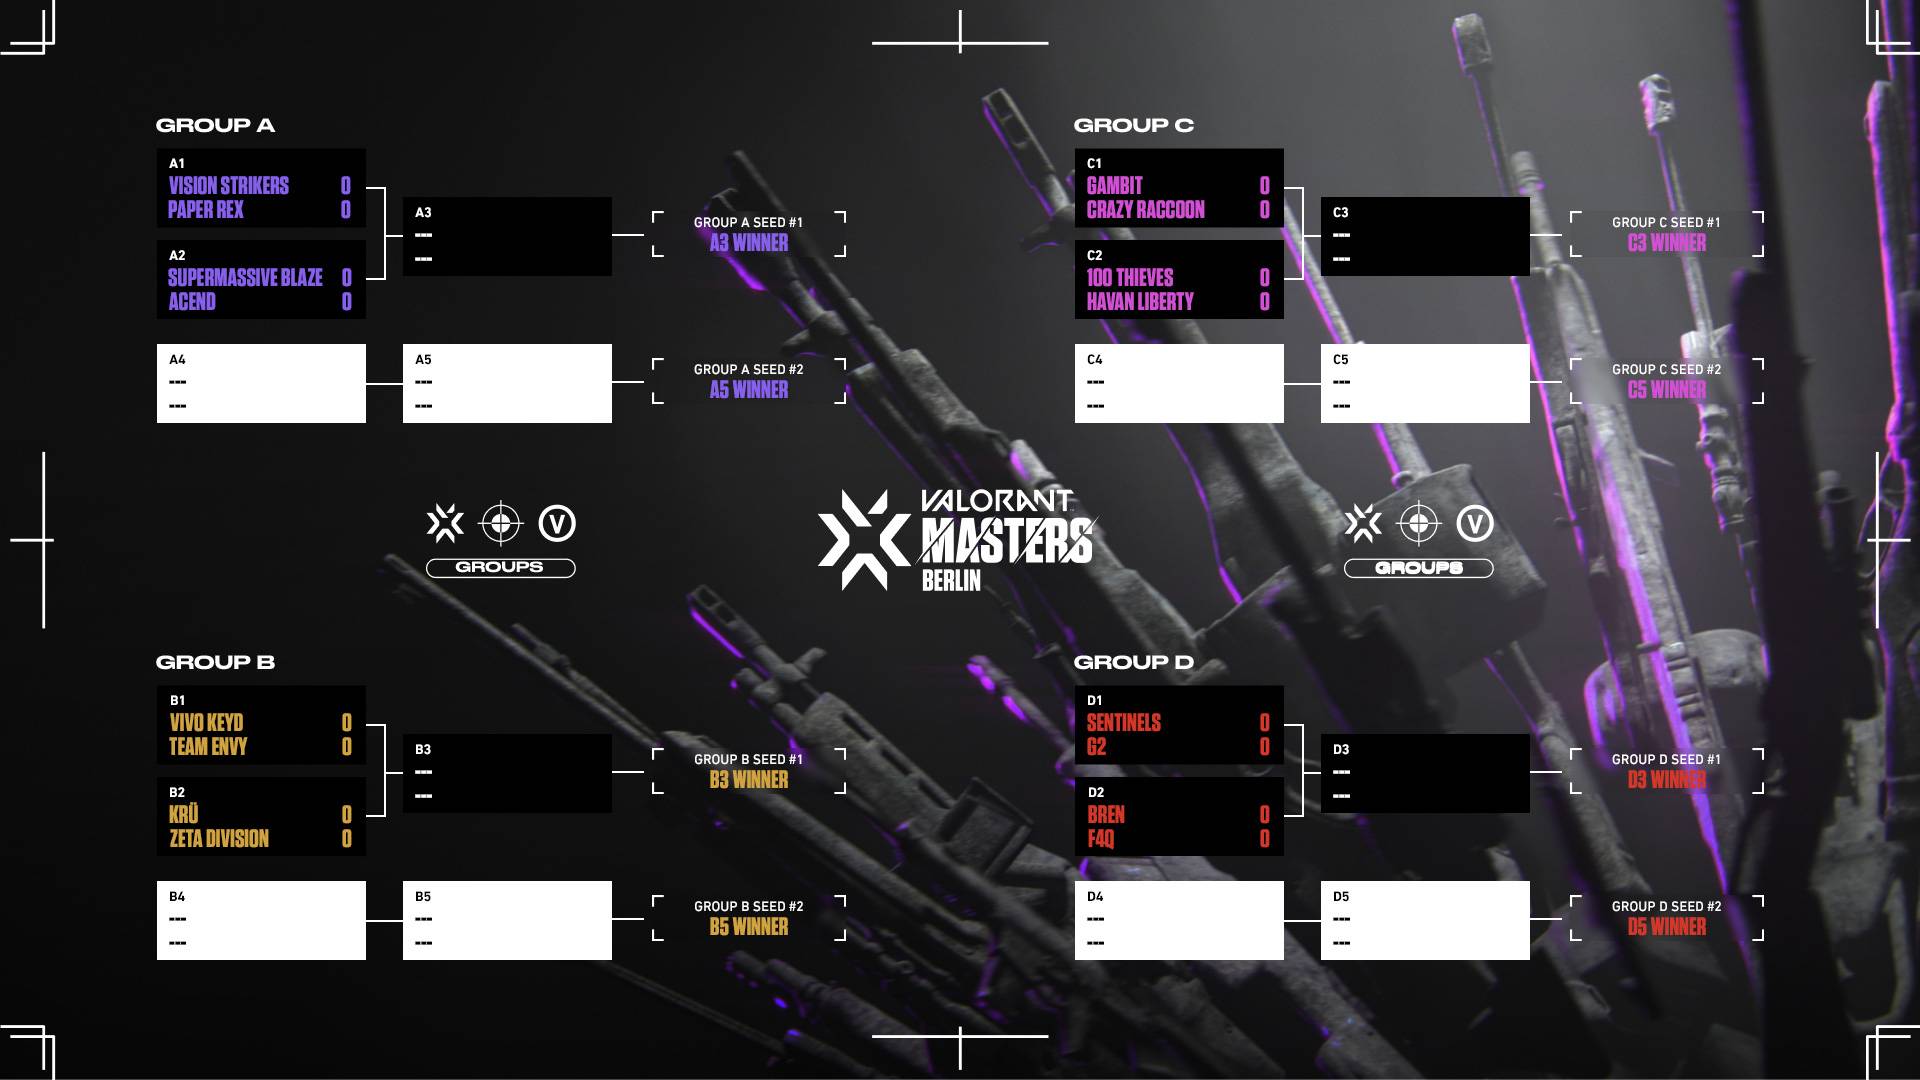 Masters 3 Group matches